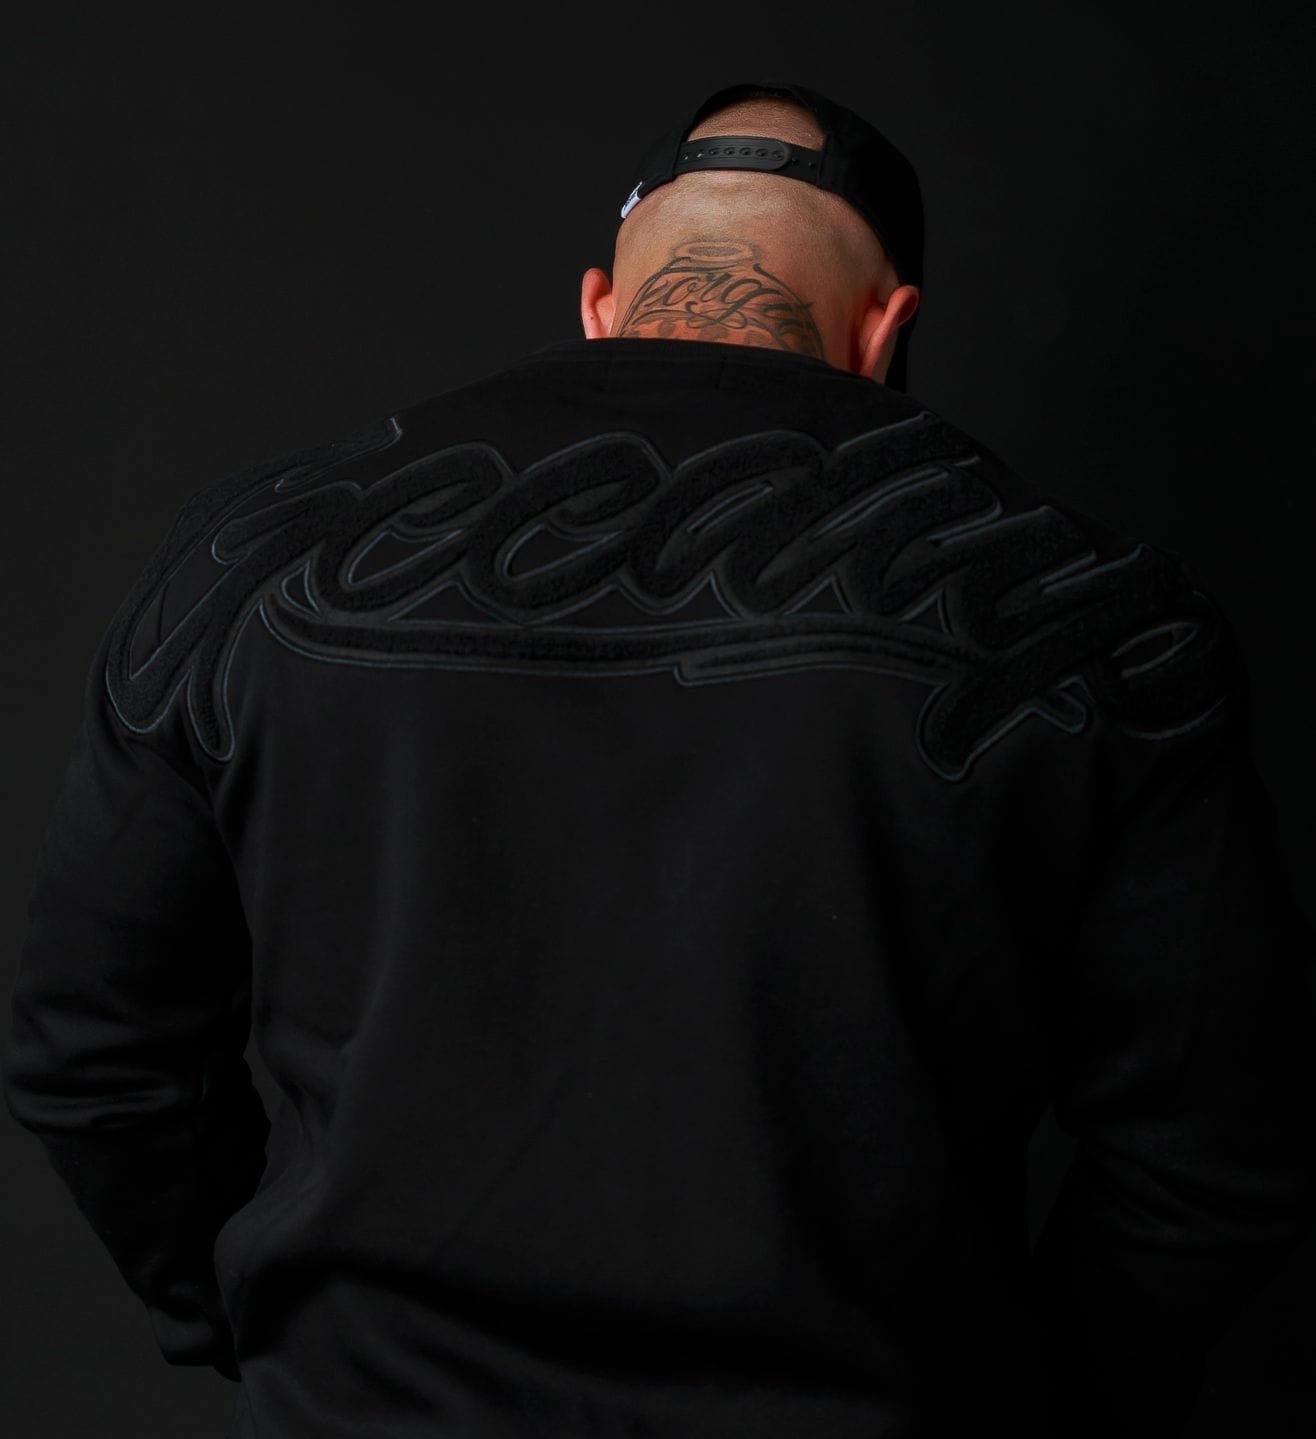 A sample of Geedup's 'BLACKOUT' collection